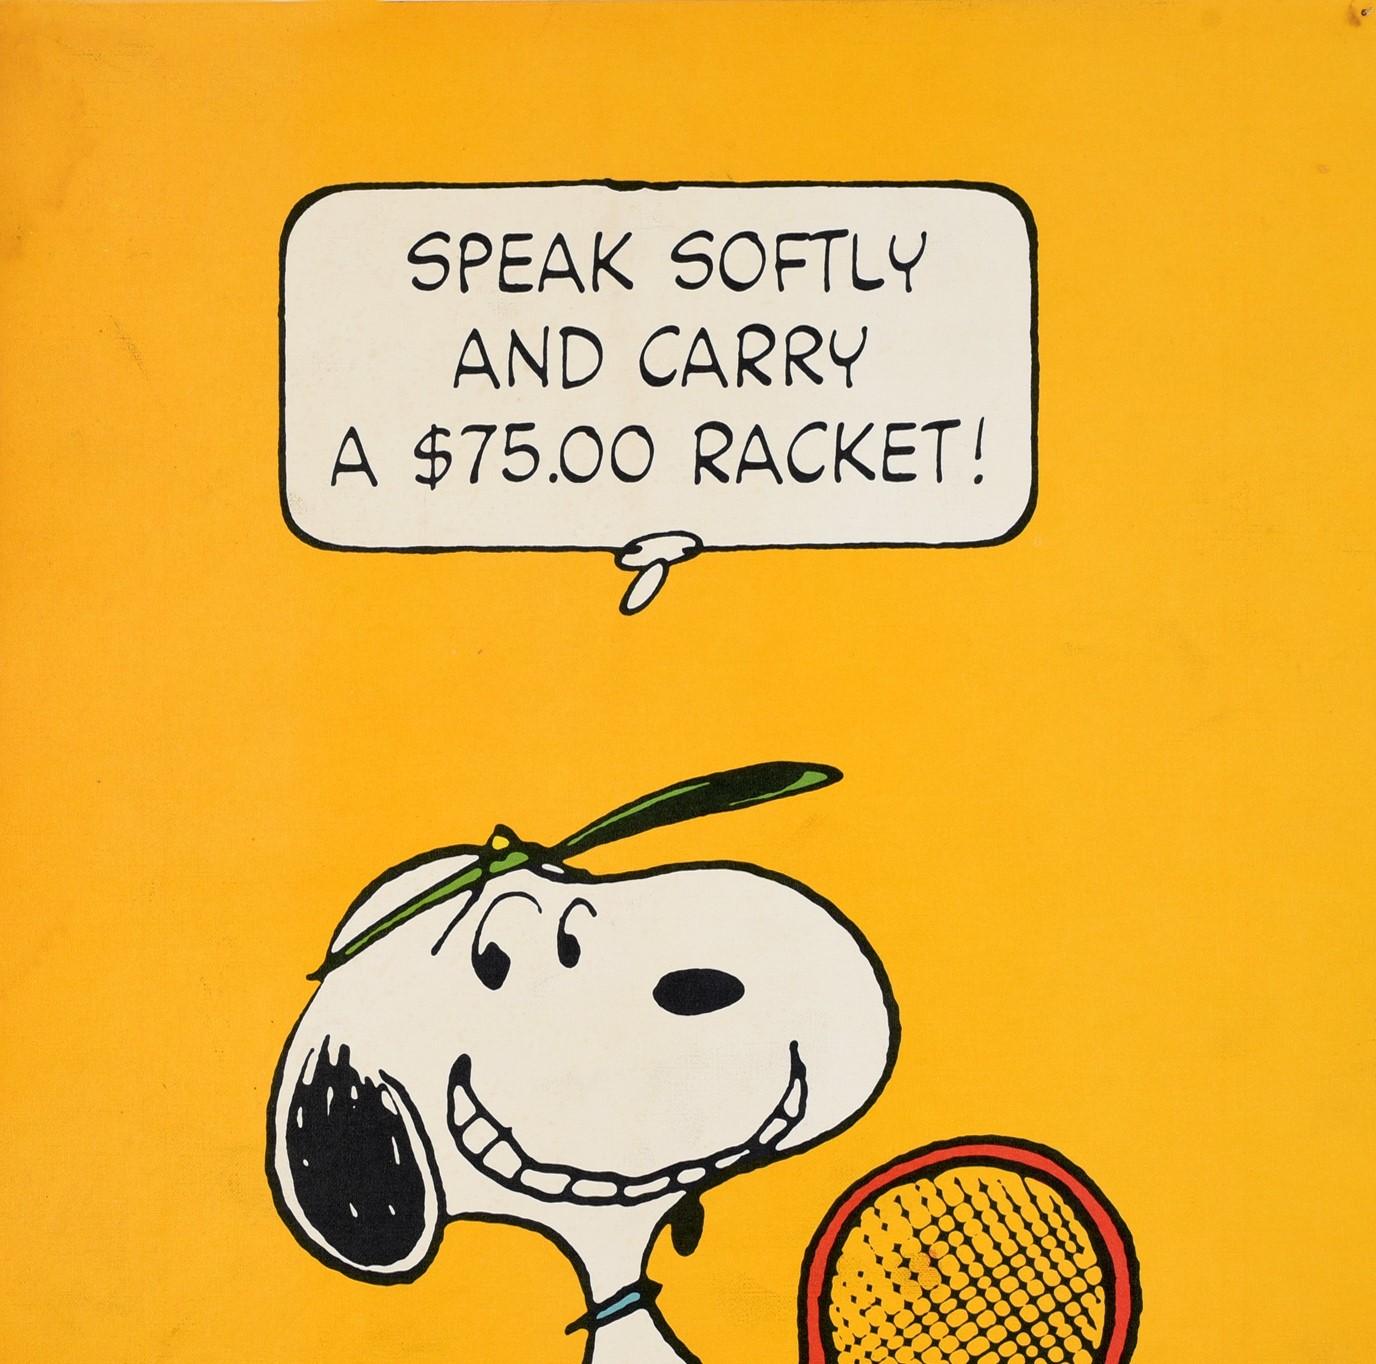 Original vintage snoopy poster - Speak softy and carry a $75.00 racket! - featuring a fun and colourful illustration by the renowned American cartoonist Charles M. Schulz (Charles Monroe Schulz 